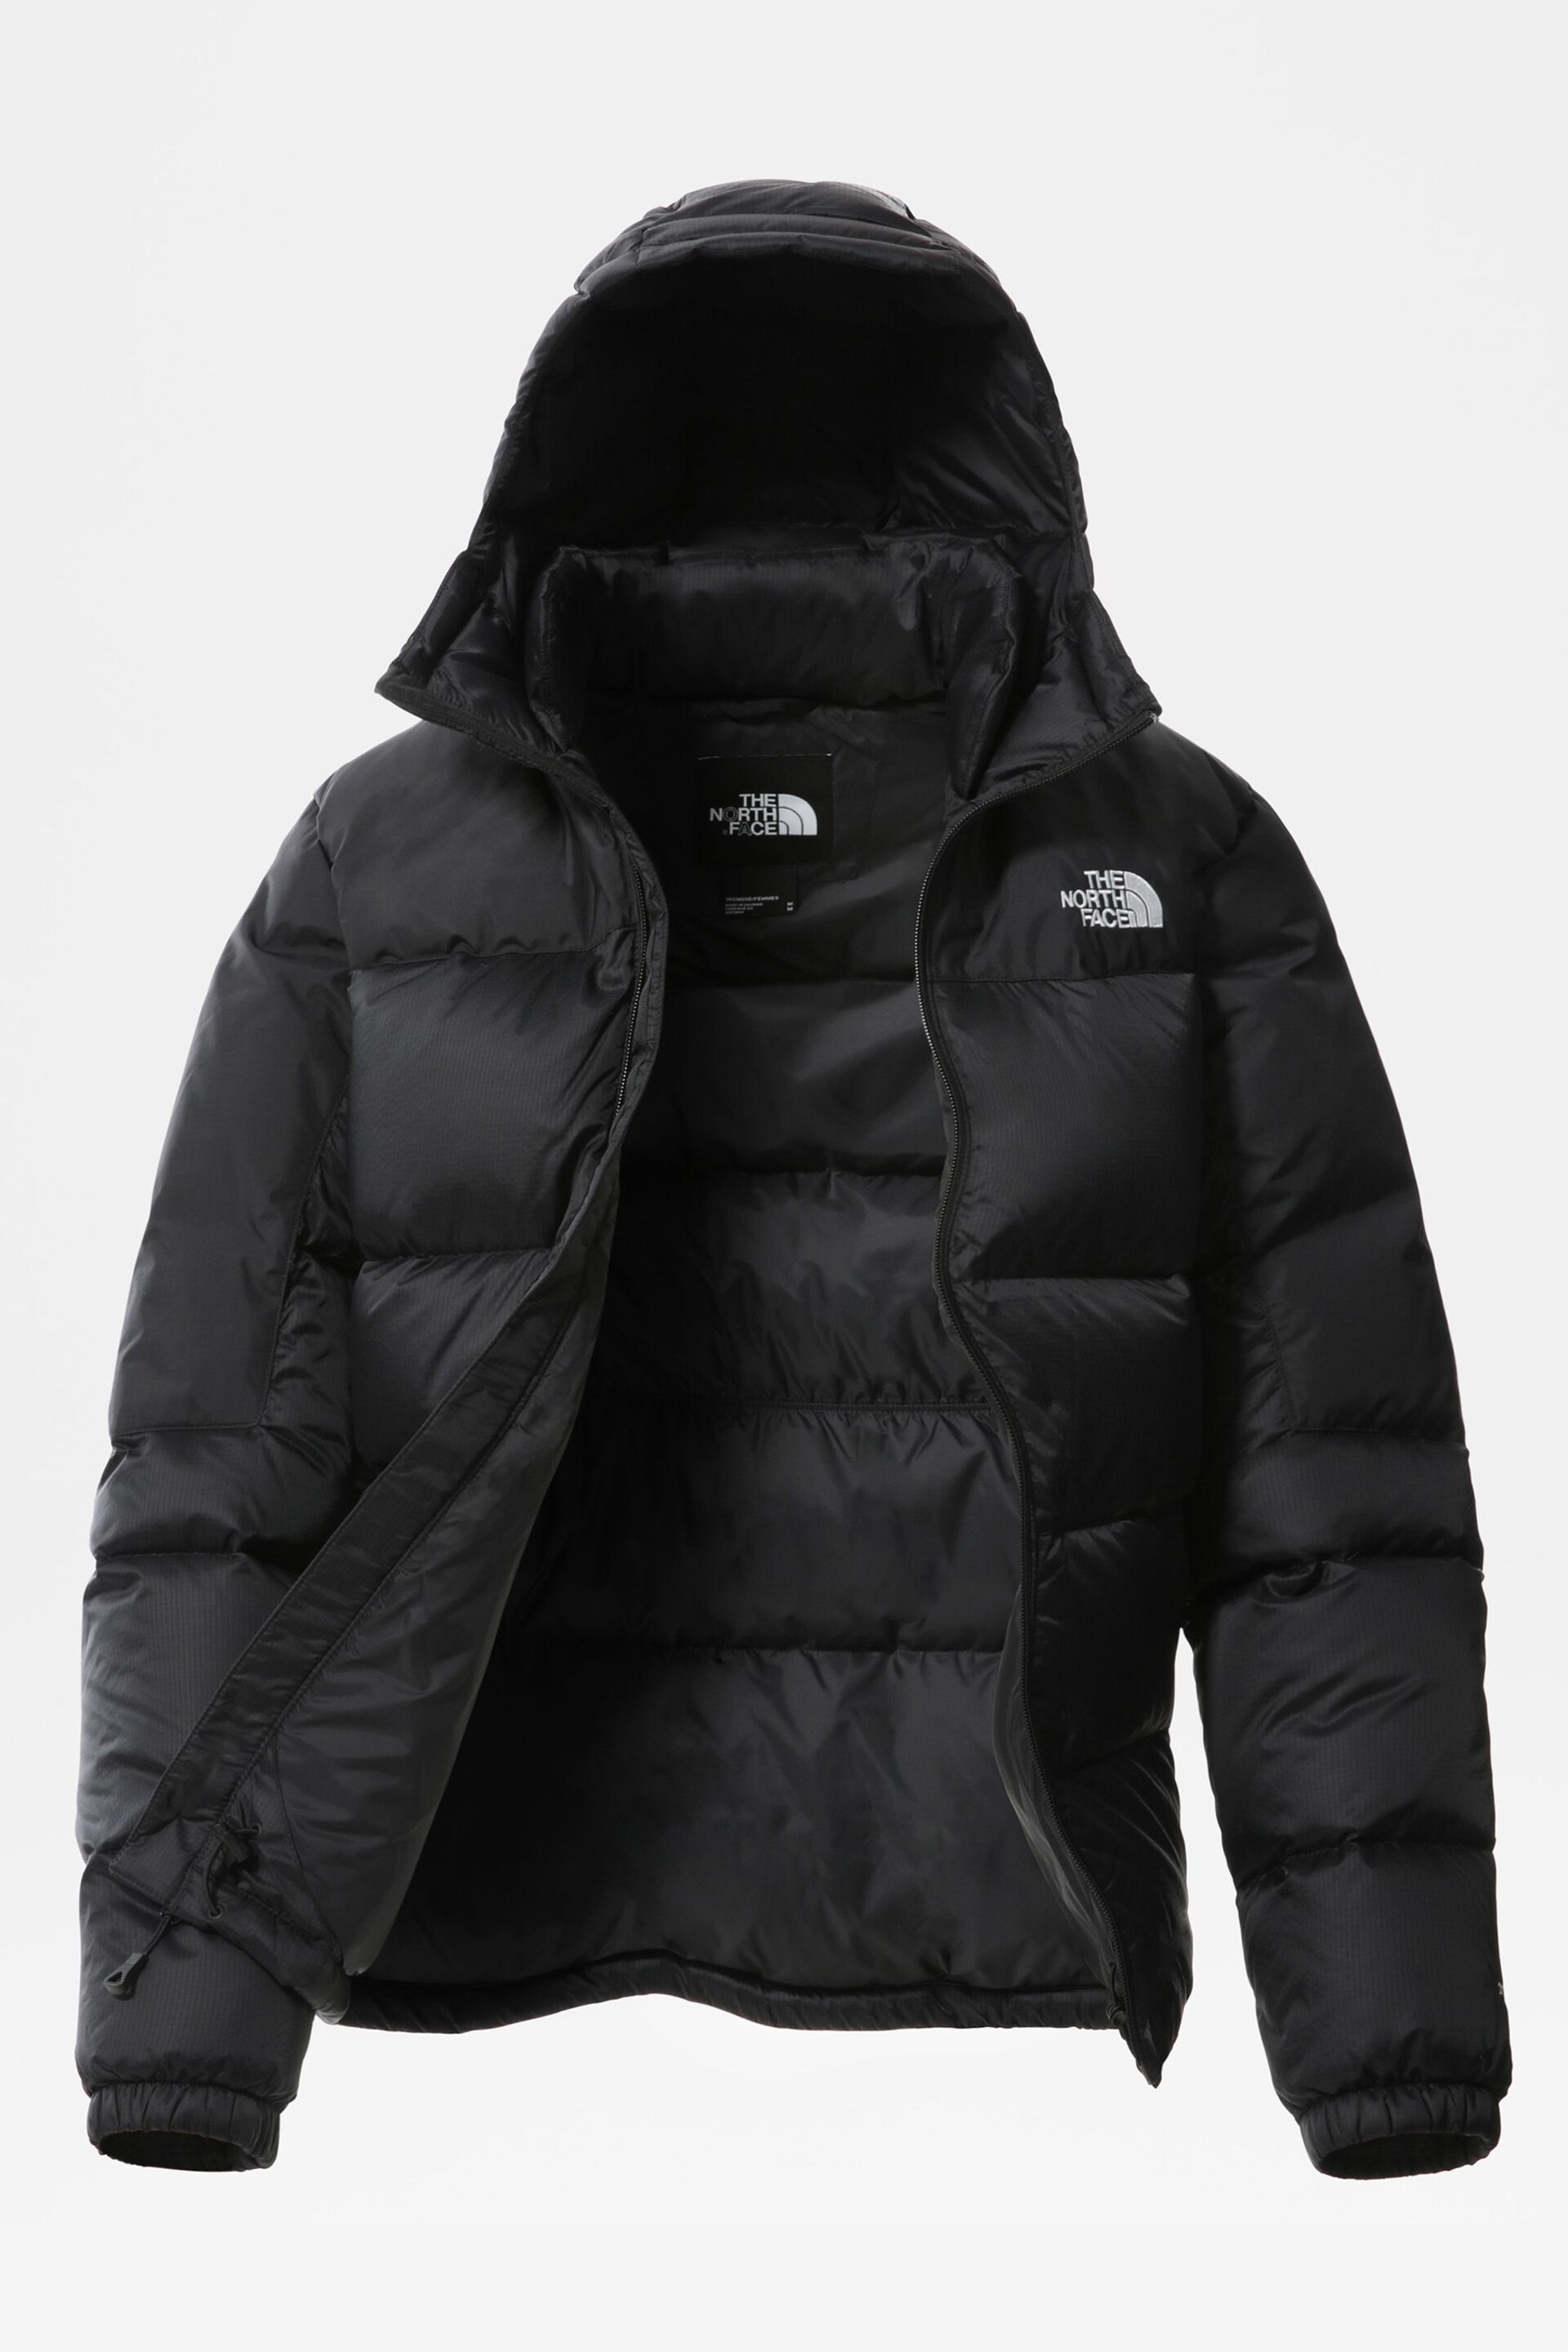 The North Face Black Diablo Down Hooded Jacket - Image 17 of 19